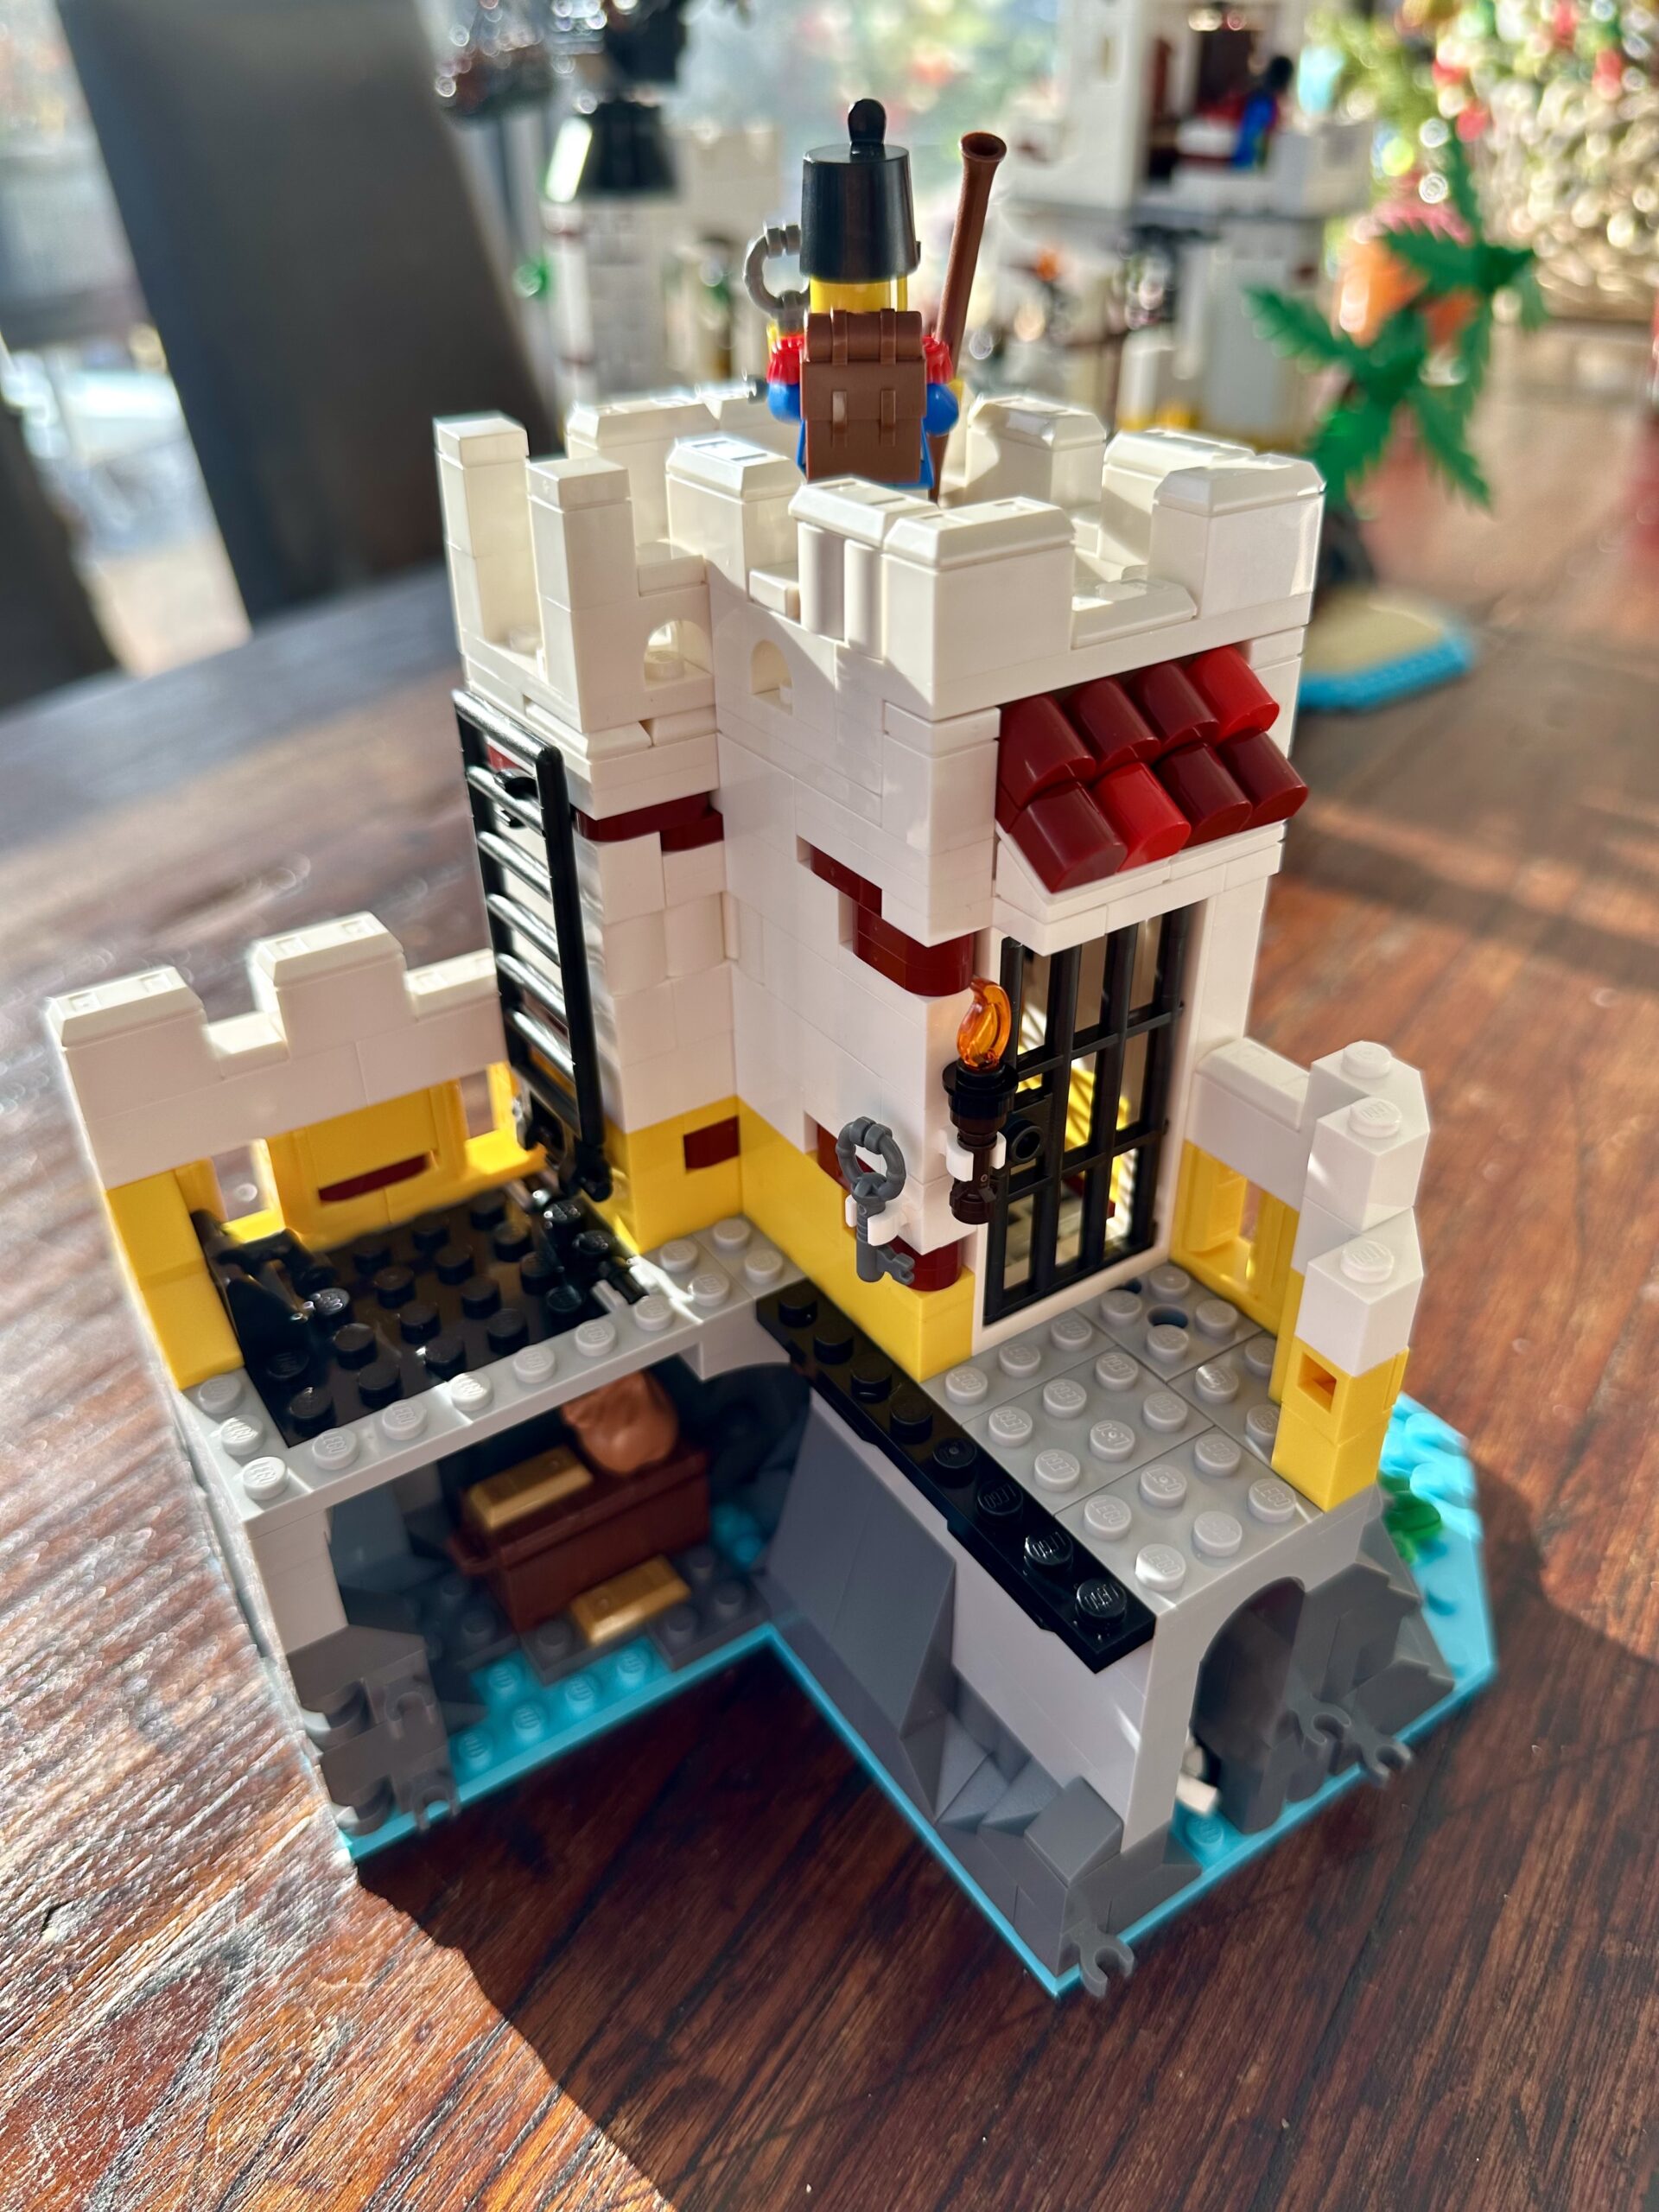 LEGO build of set 10320 Eldorado Fortress in progress. An L-shaped section with gray rock foundations and a white tower with yellow and dark red accents built atop it. The tower holds a prison cell and a soldier stands guard up top (facing away).